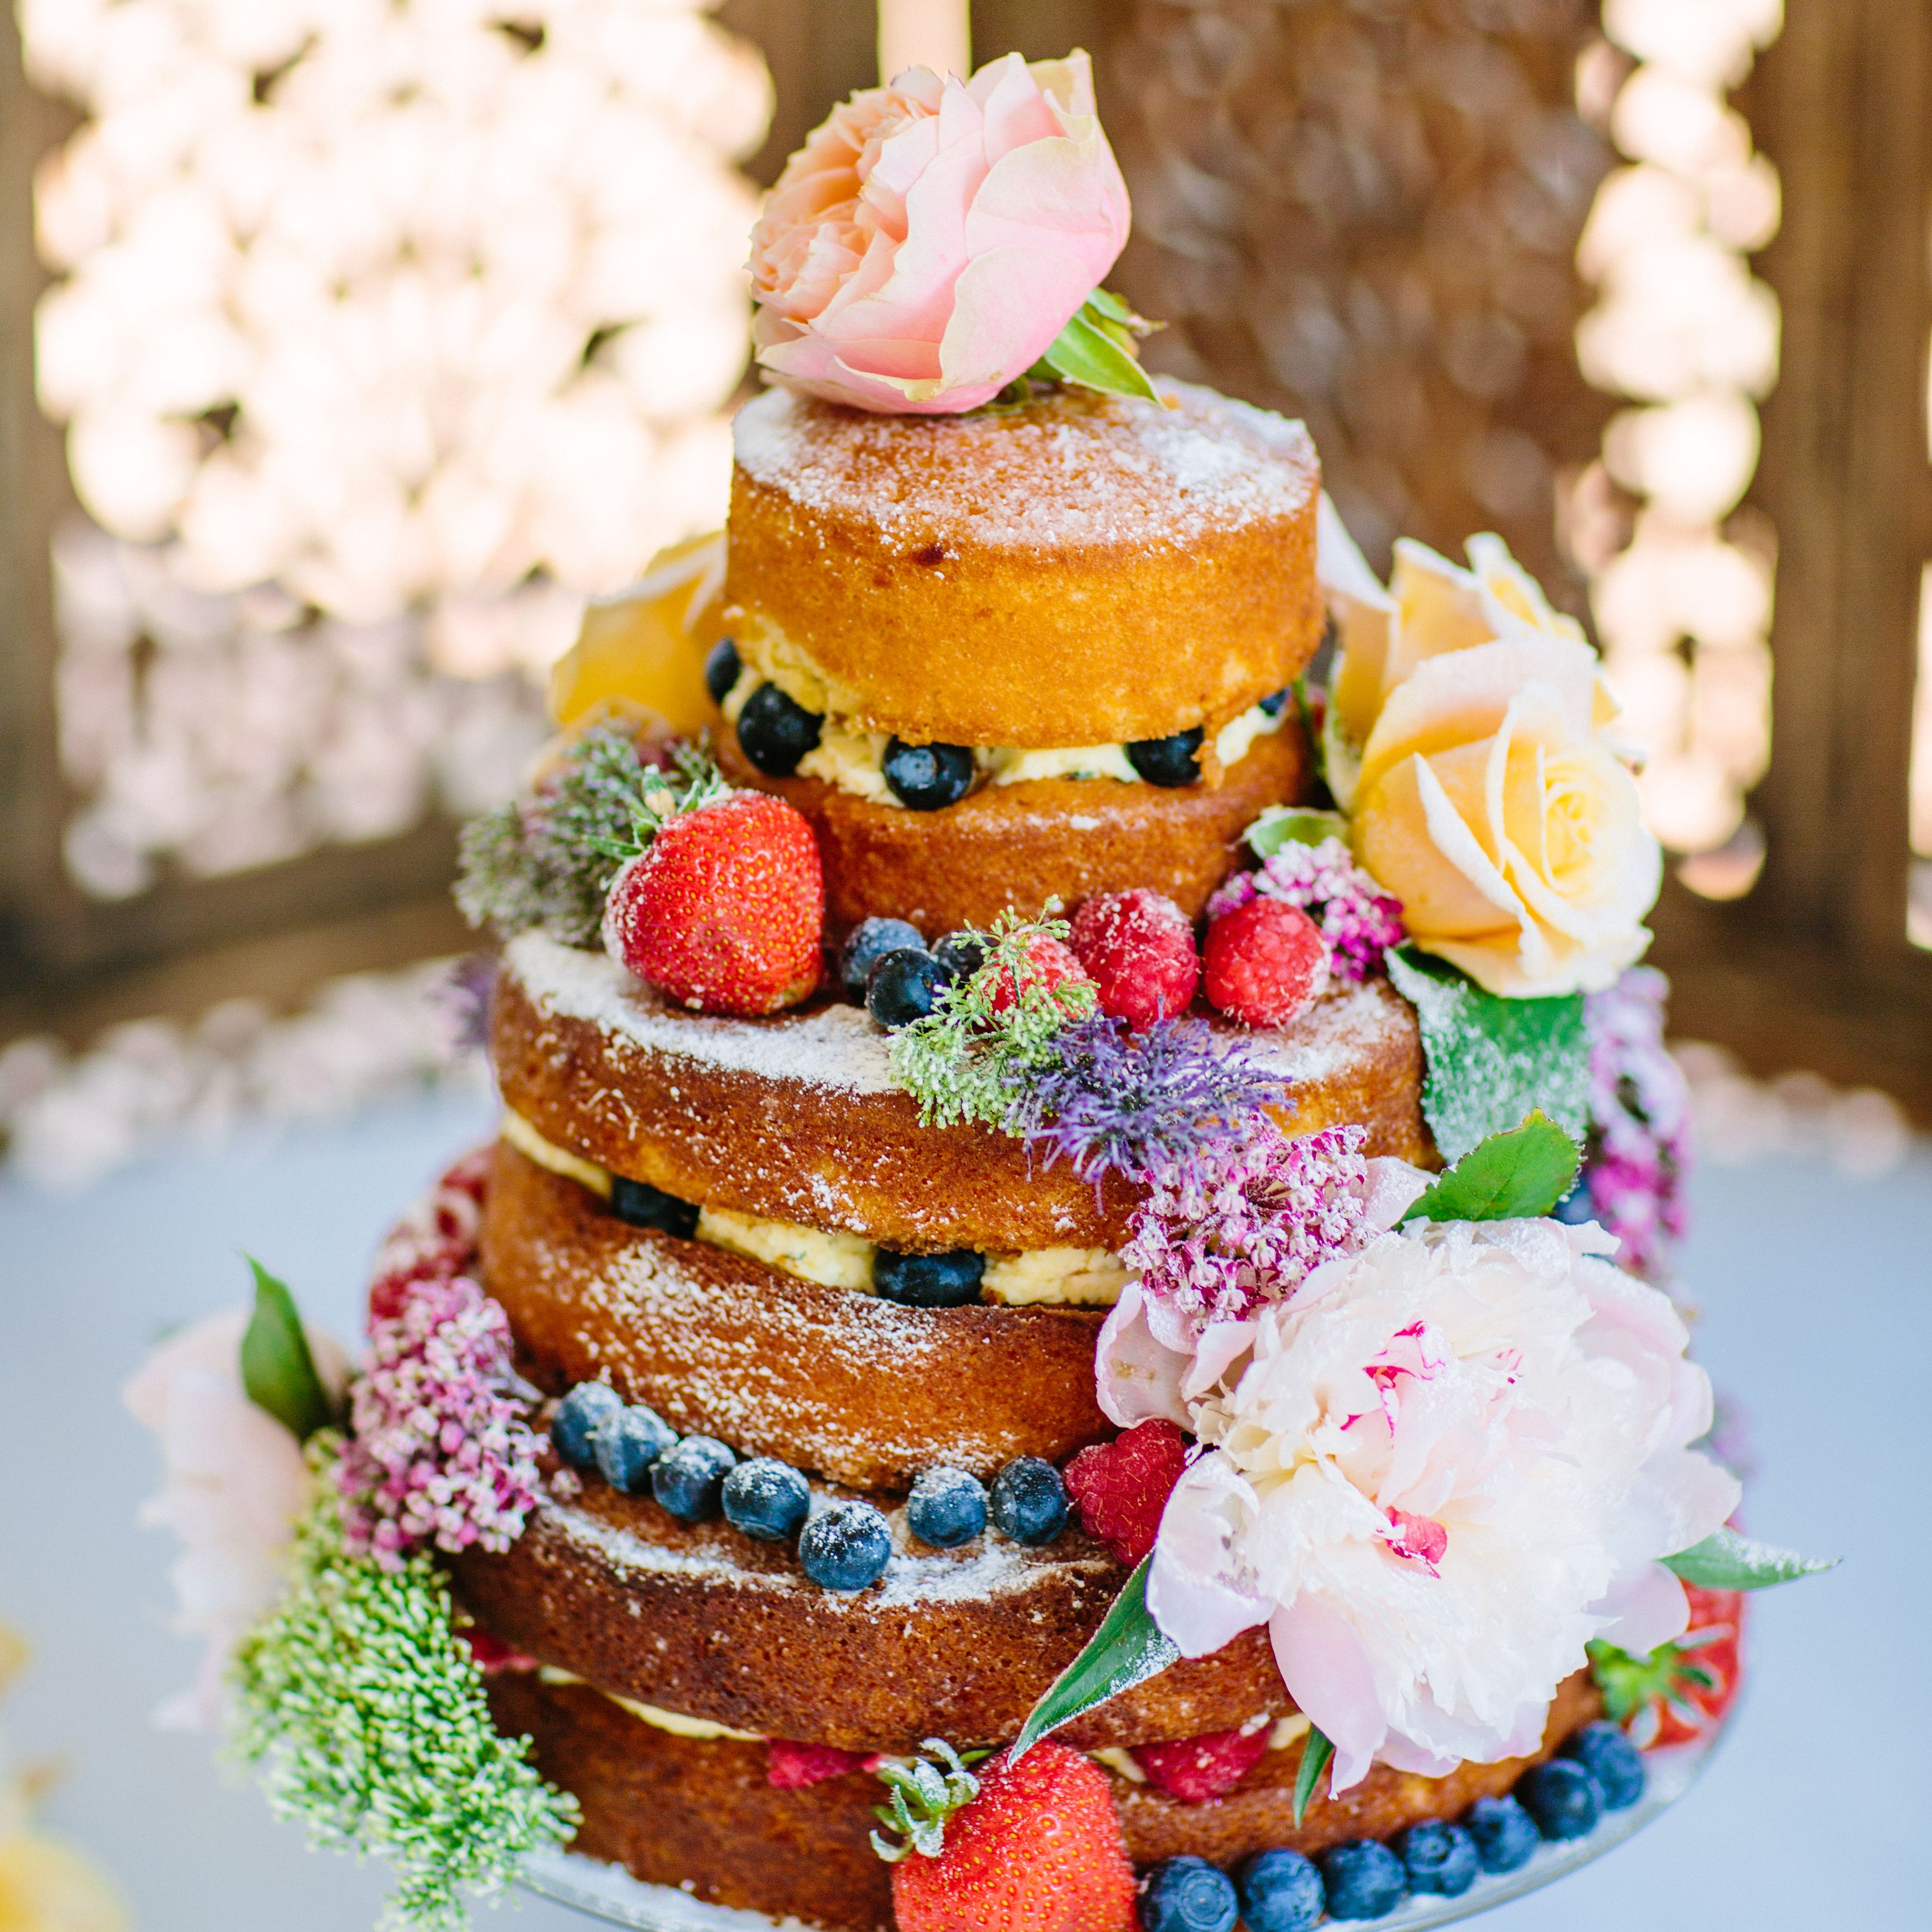 This Wedding Cake Trend Can Be Pretty Dangerous